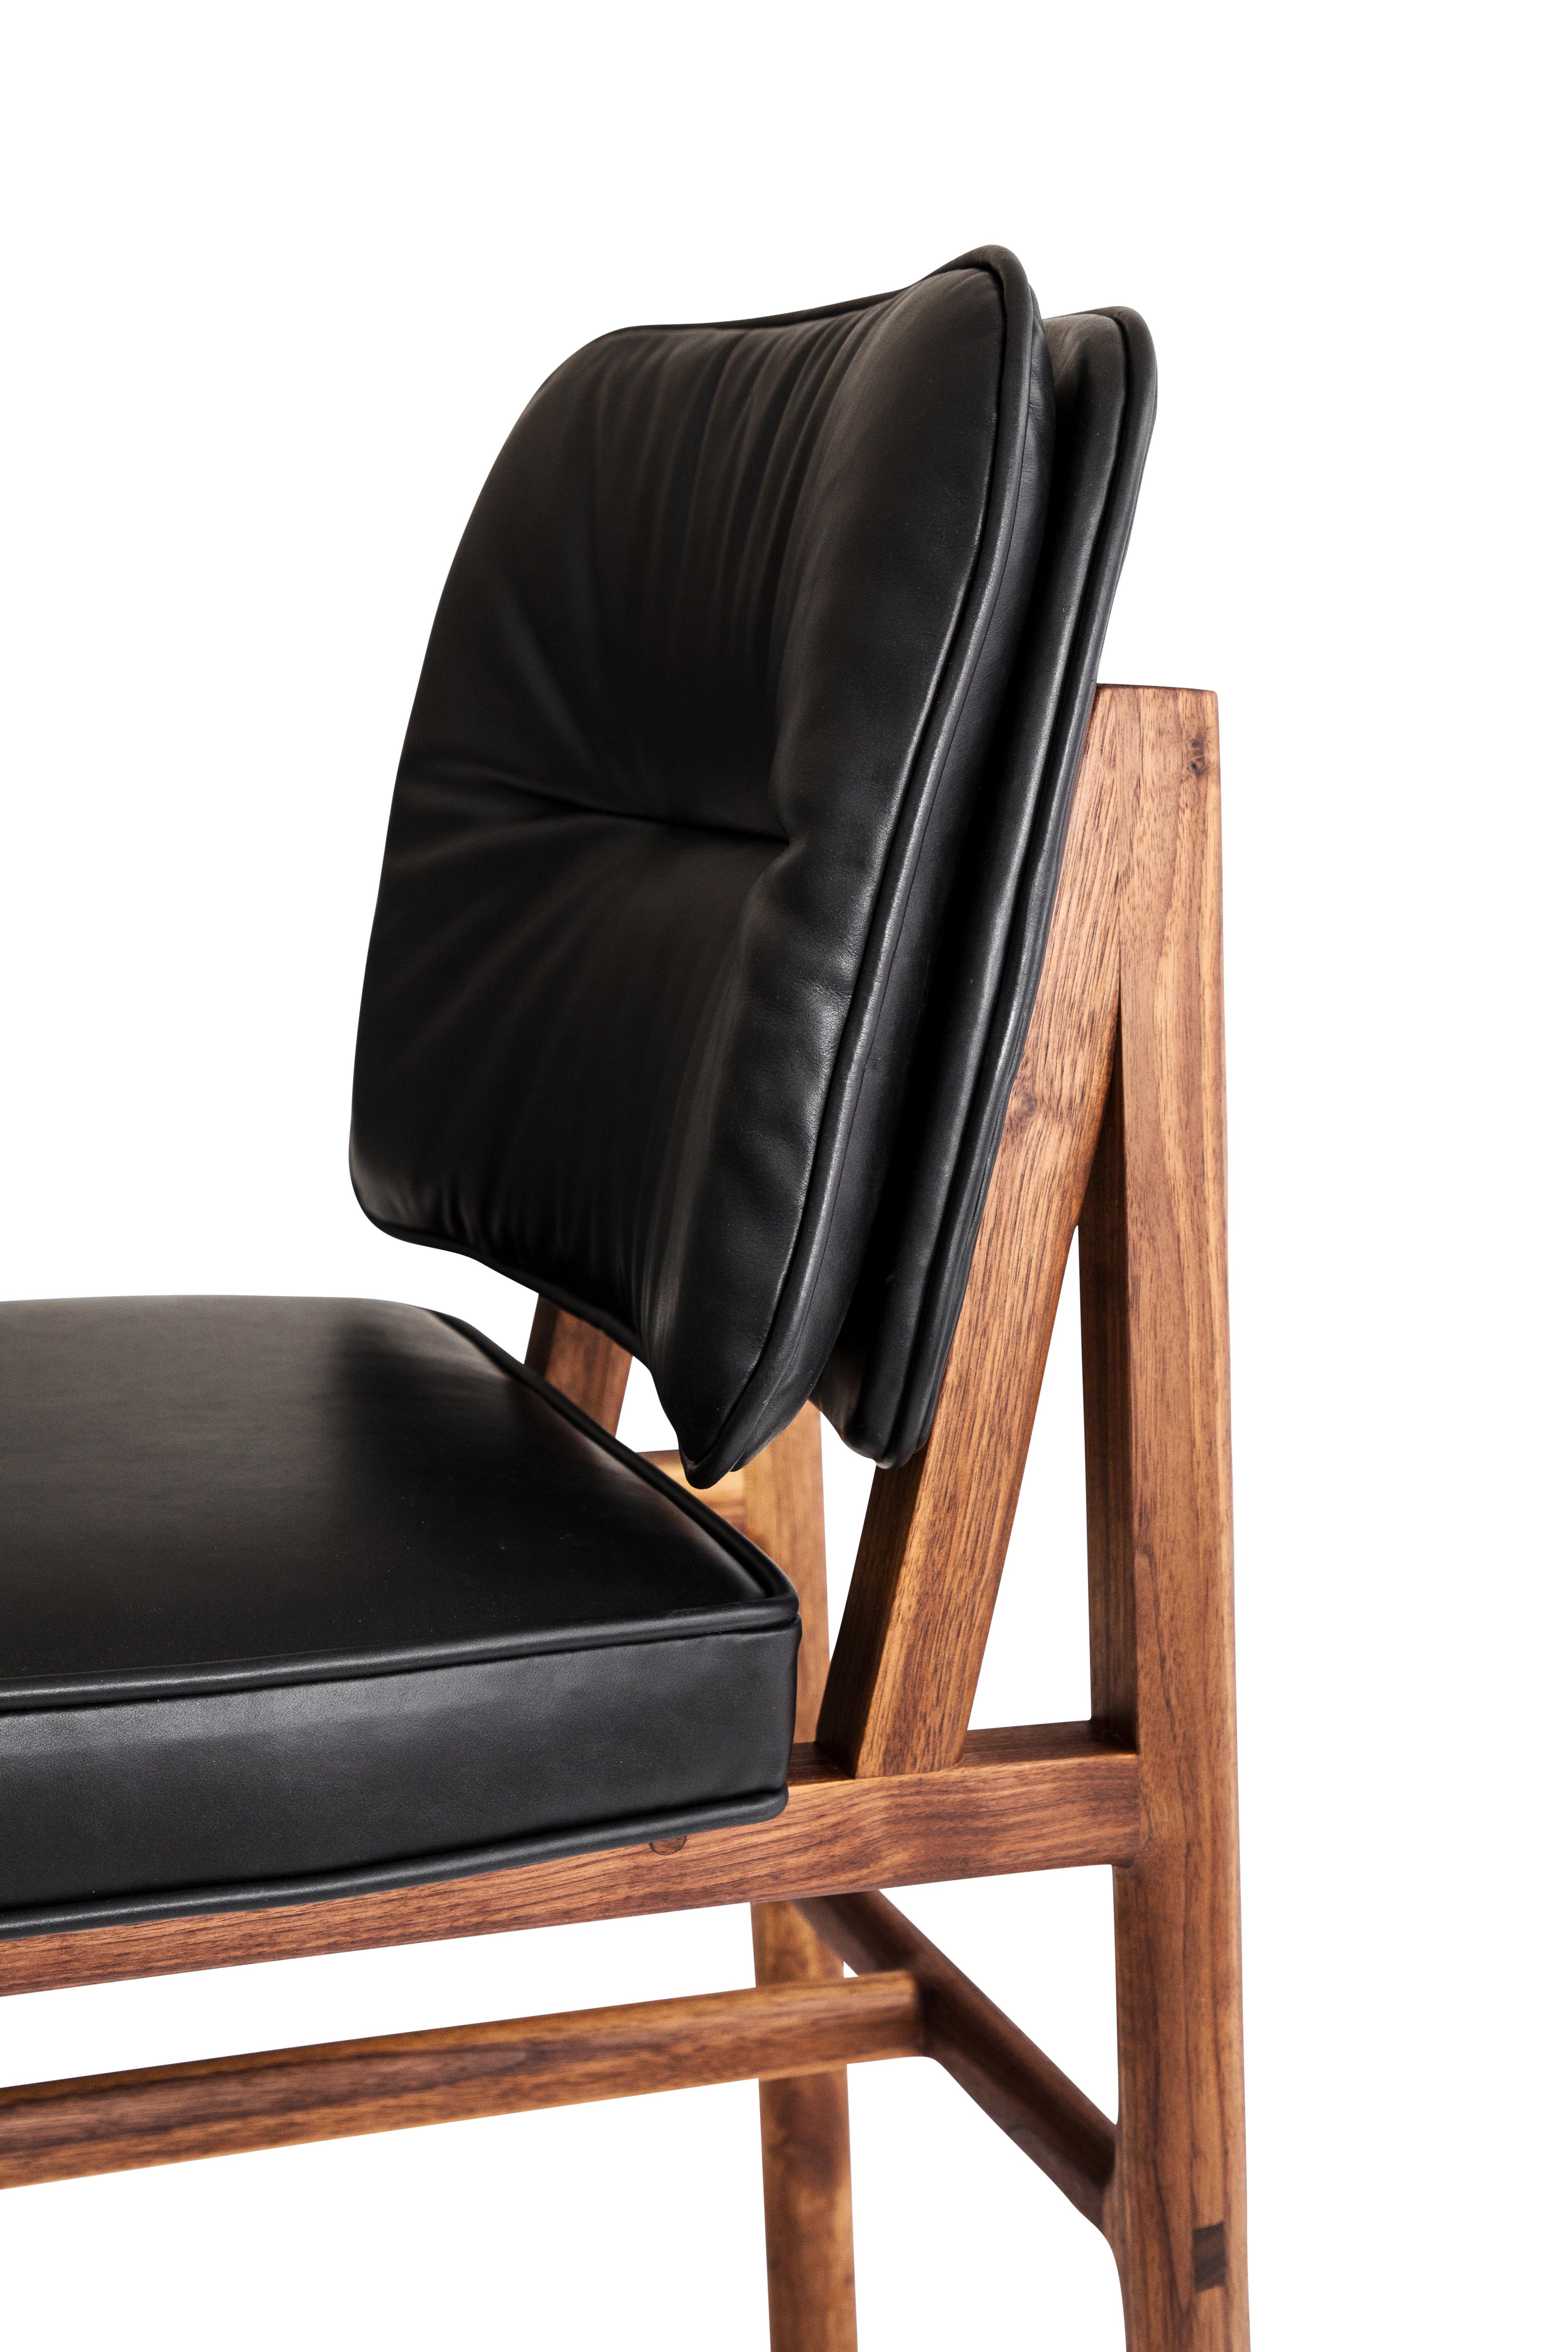 Solid wood construction with hand-cut joinery and custom upholstered seat and seat back. This chair shown in walnut and black leather.

In stock leather choice: black, olive, camel or vegtan leather.
Wood choice: ebonized oak, walnut, natural oak or